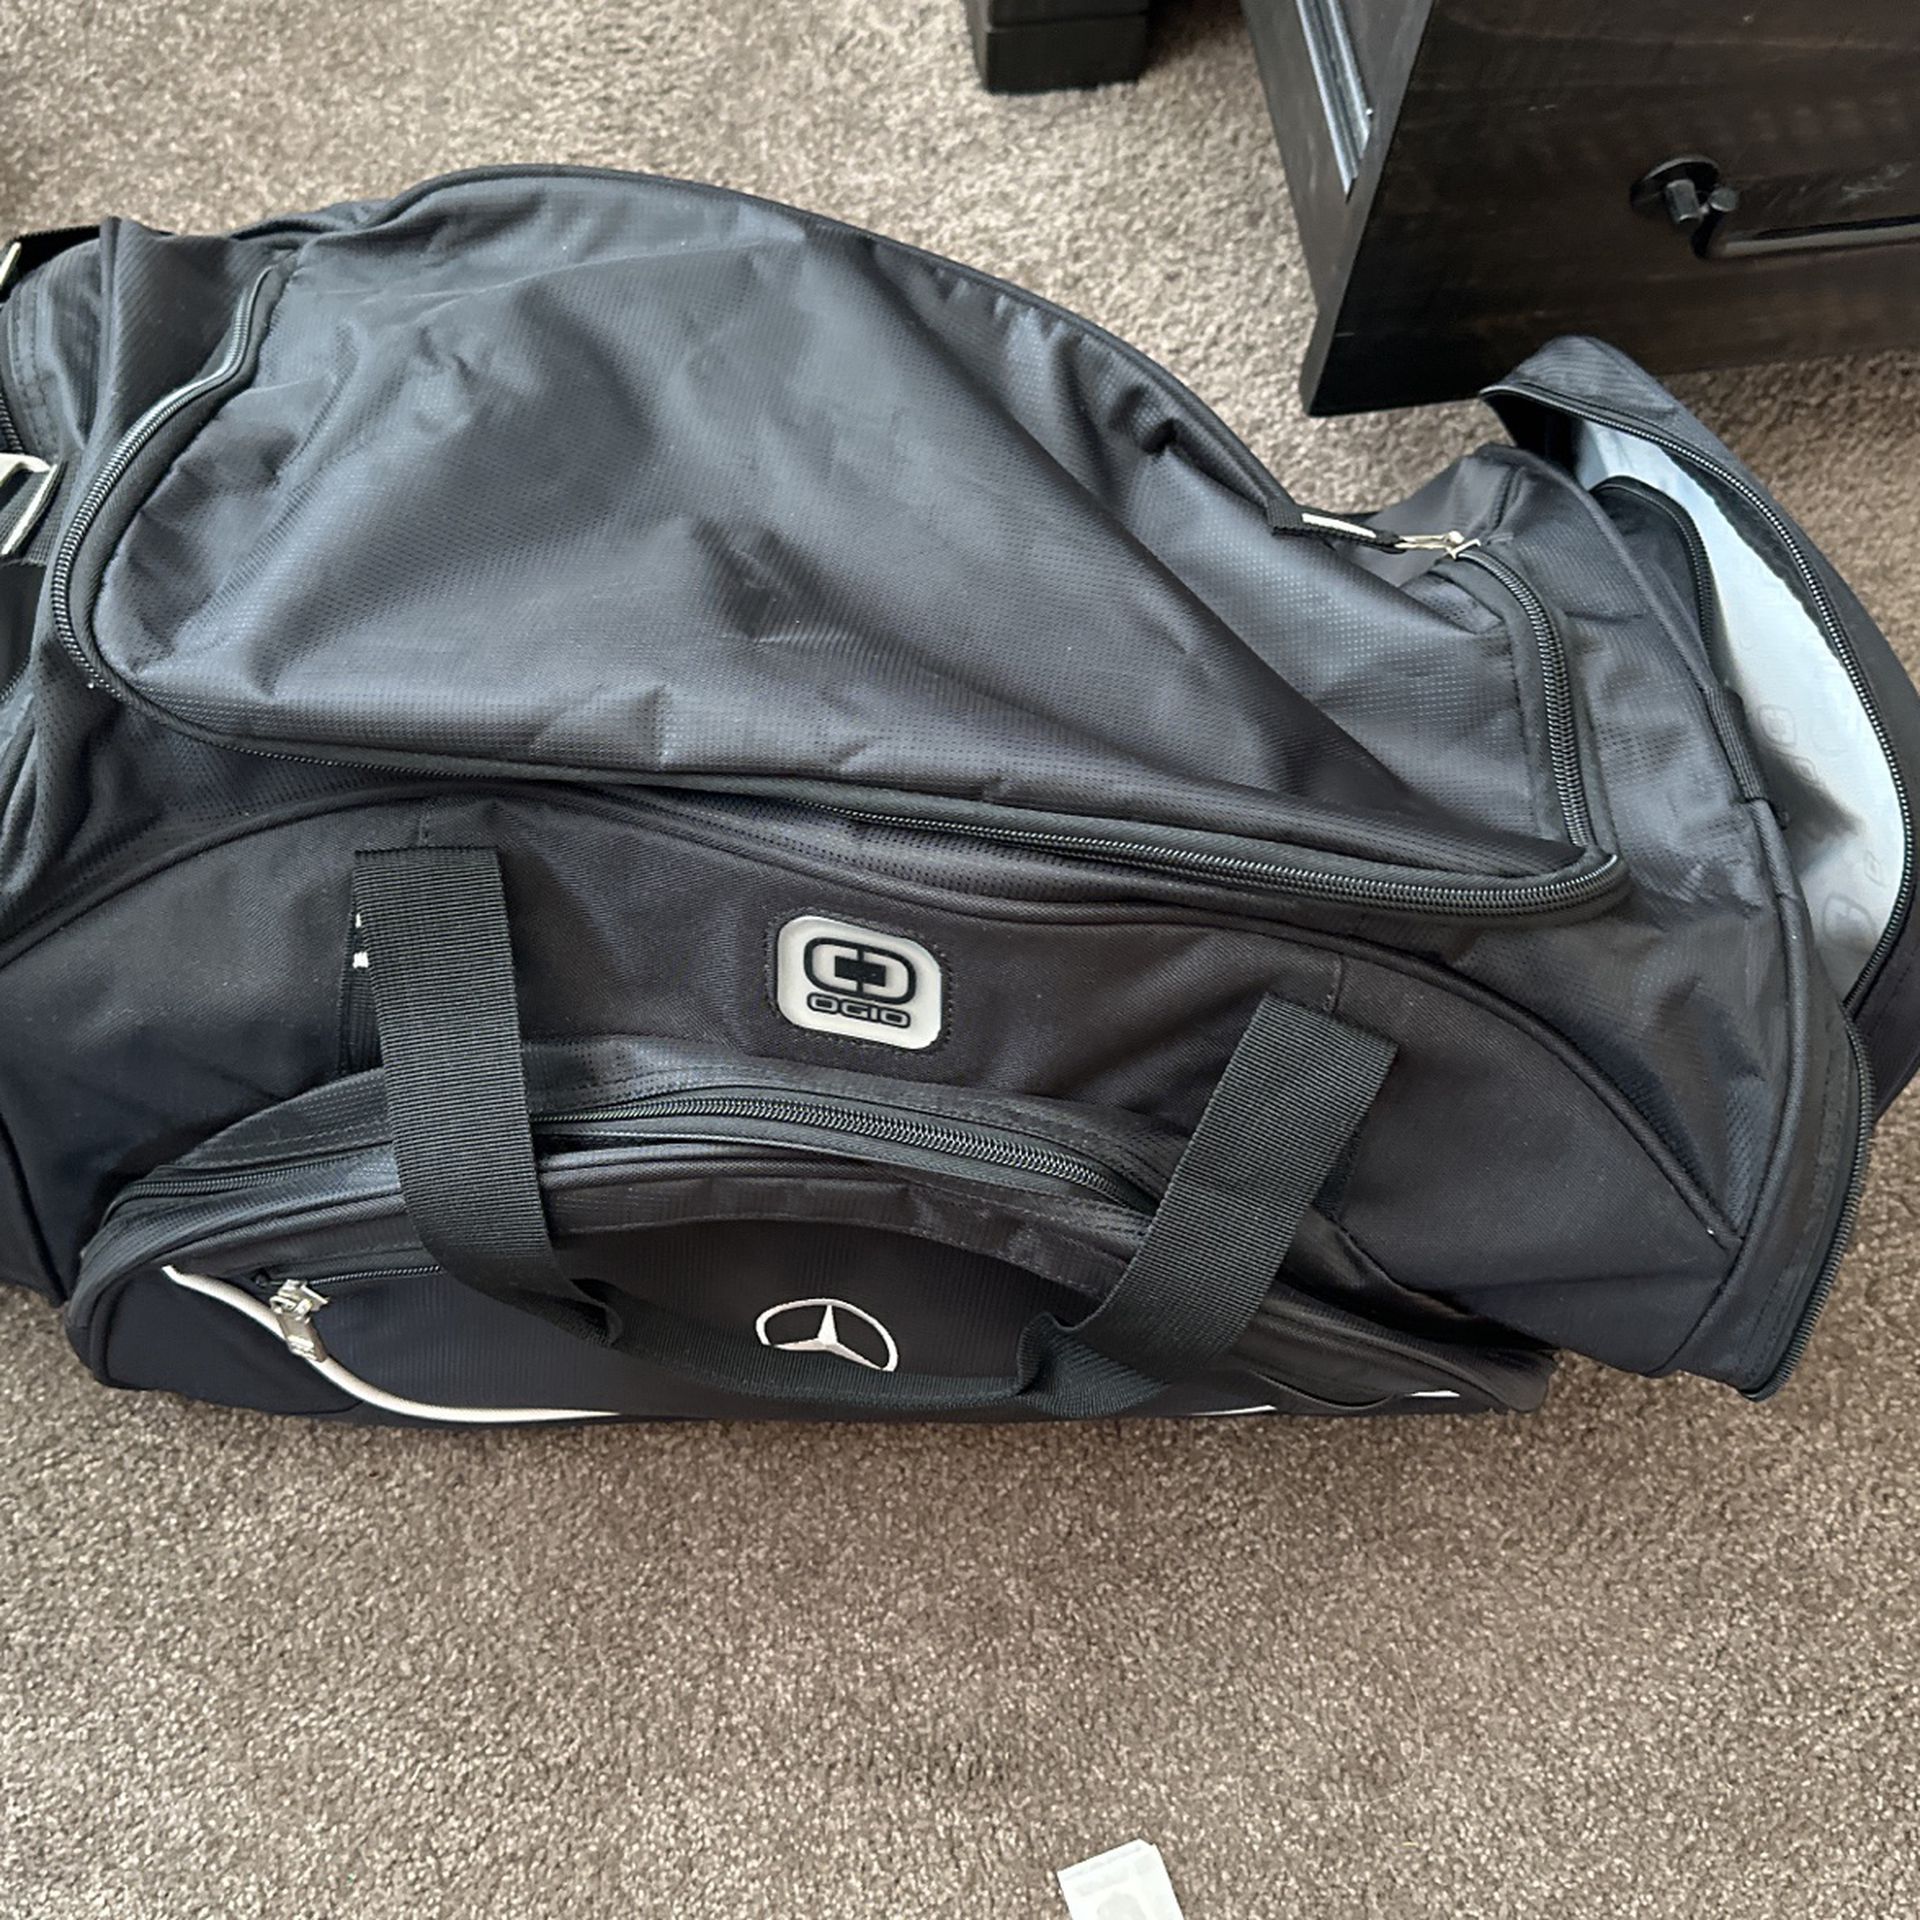 Mercedes Benz Duffle Bag for Sale in Upland, CA - OfferUp